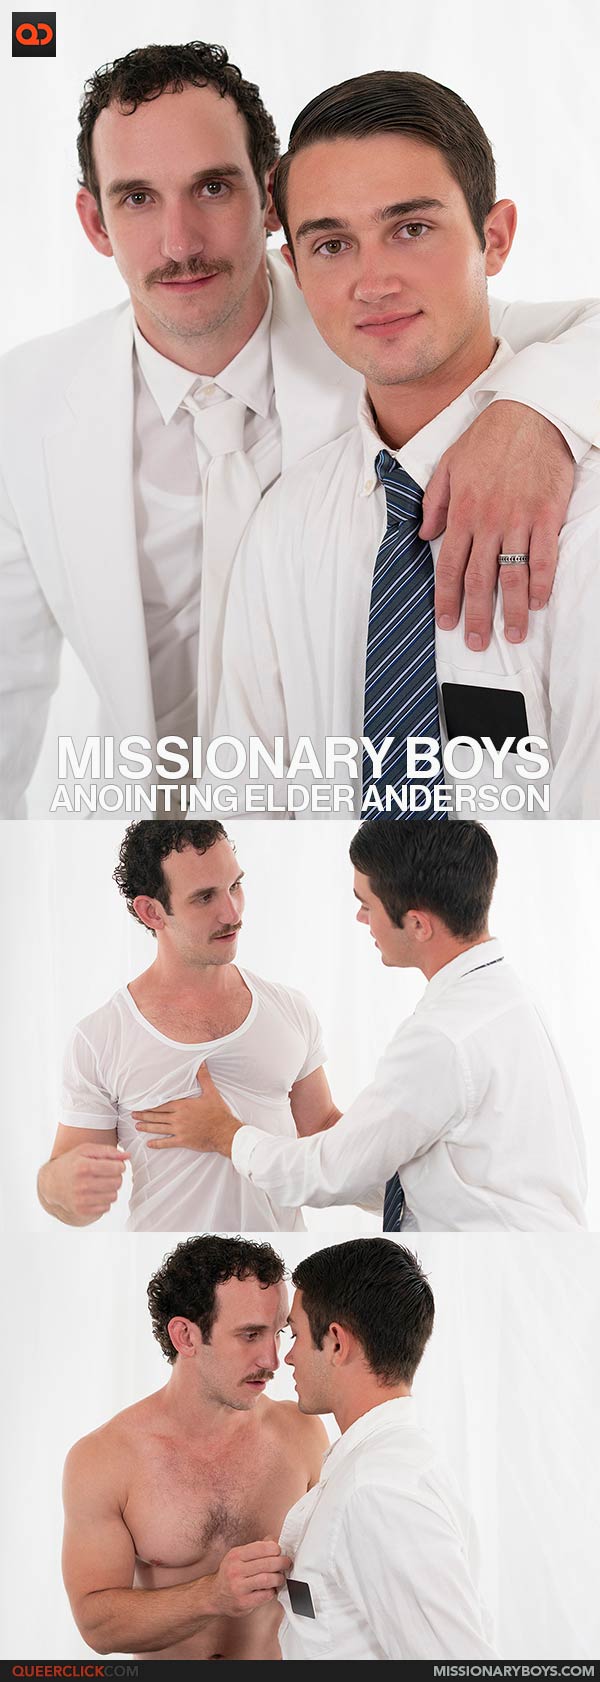 Missionary Boys: Elder Anderson Ch 2 - Anointing Elder Anderson